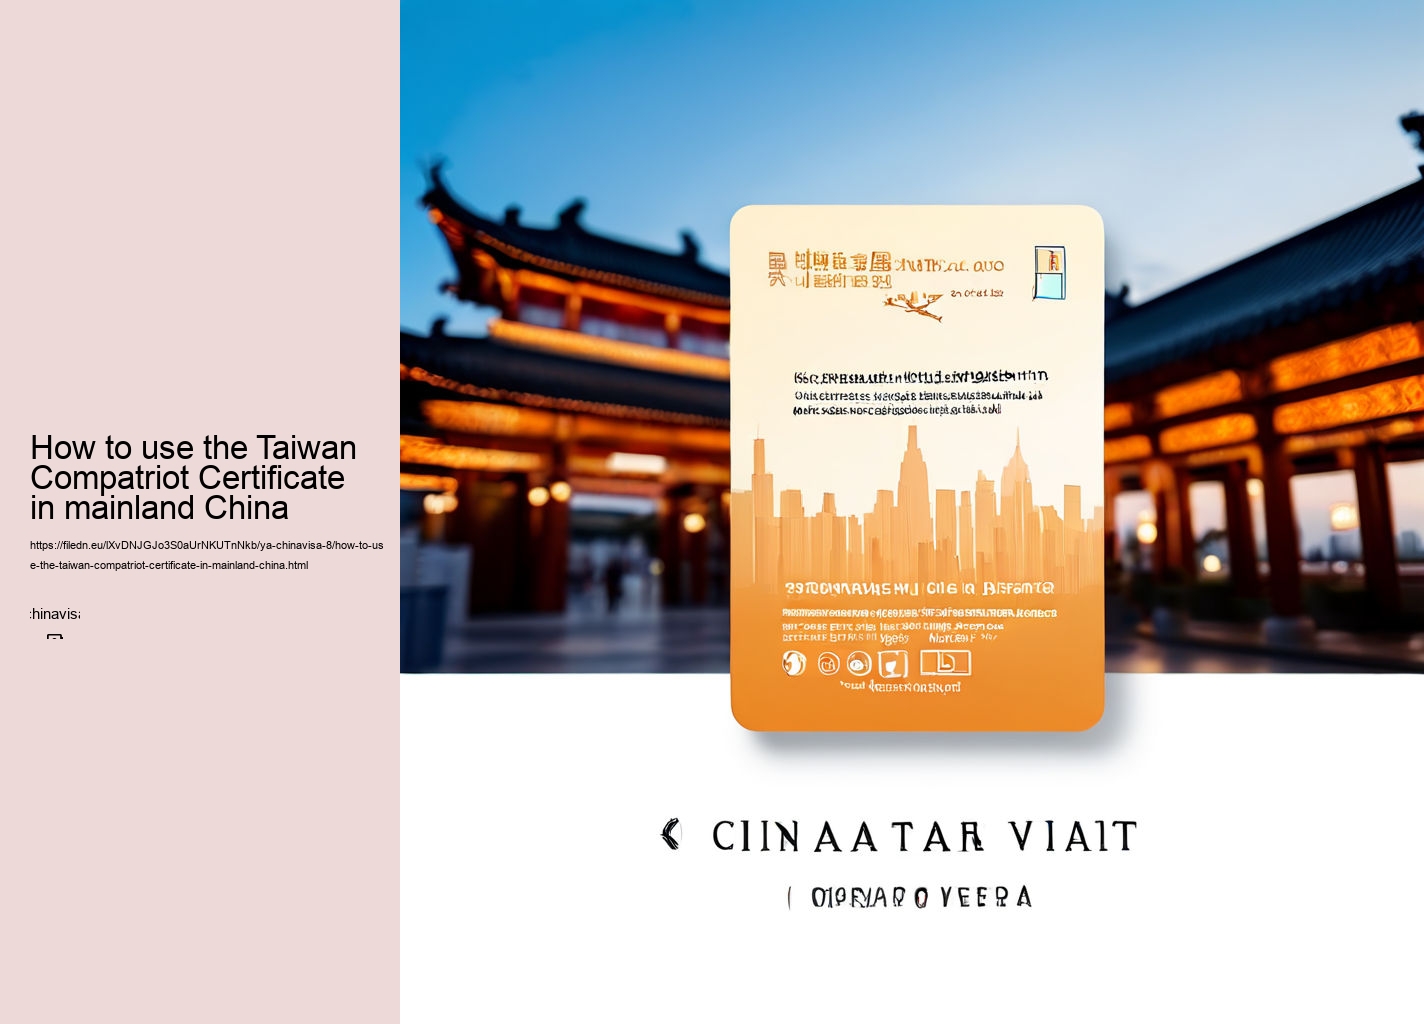 How to use the Taiwan Compatriot Certificate in mainland China